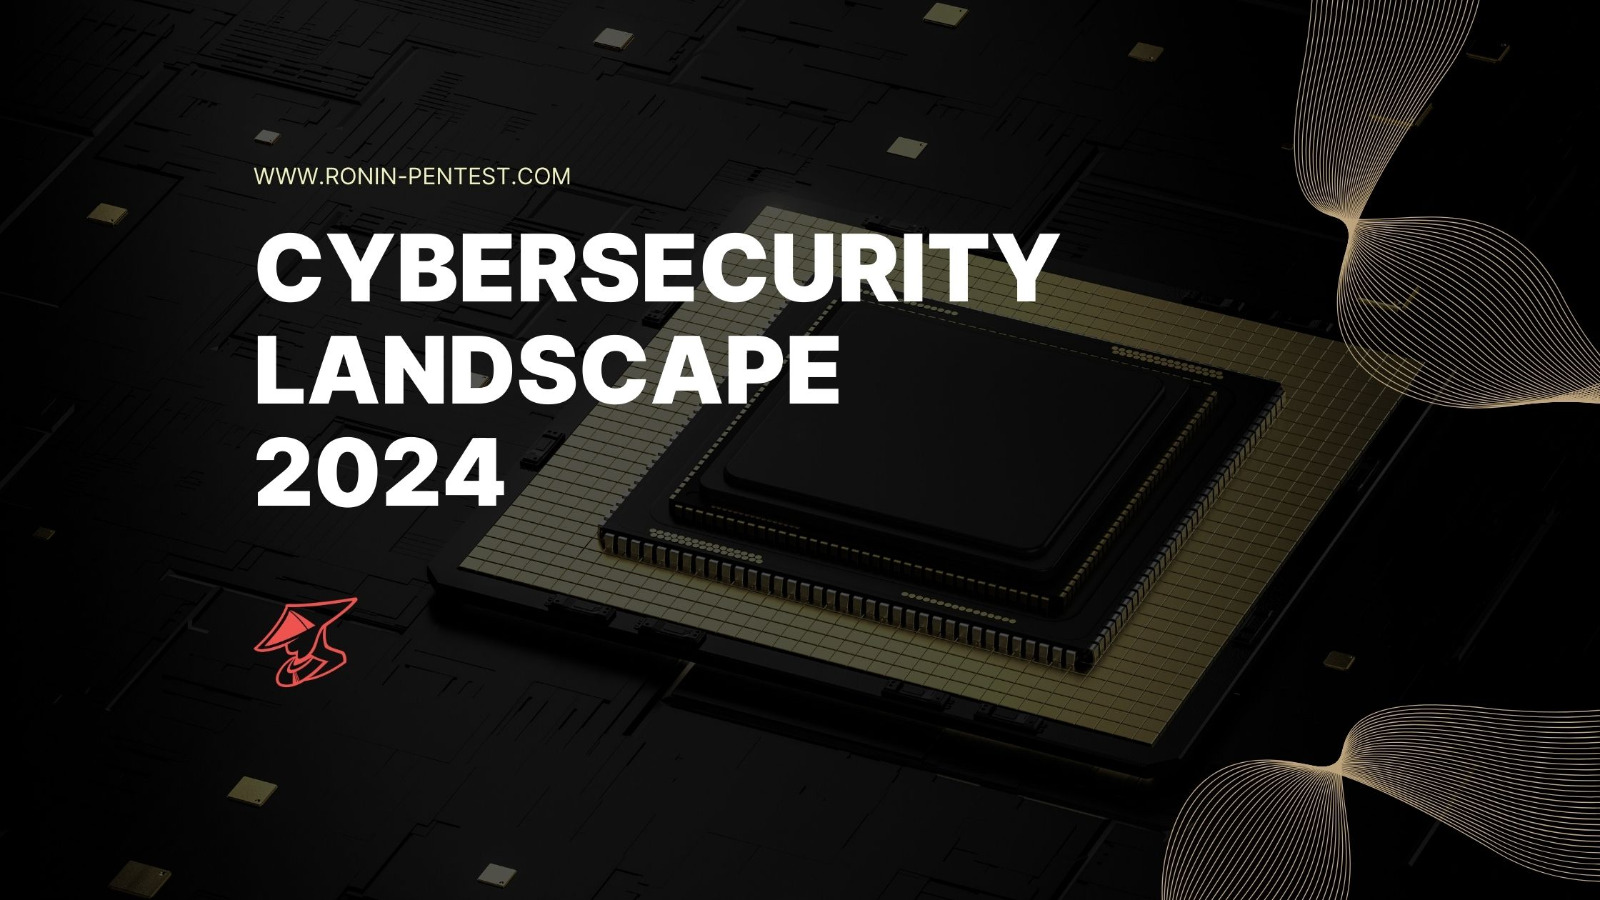 Ronin-Pentest | Navigating the Cybersecurity Landscape in 2024: AI, Quantum Computing, and Advanced Phishing Threats